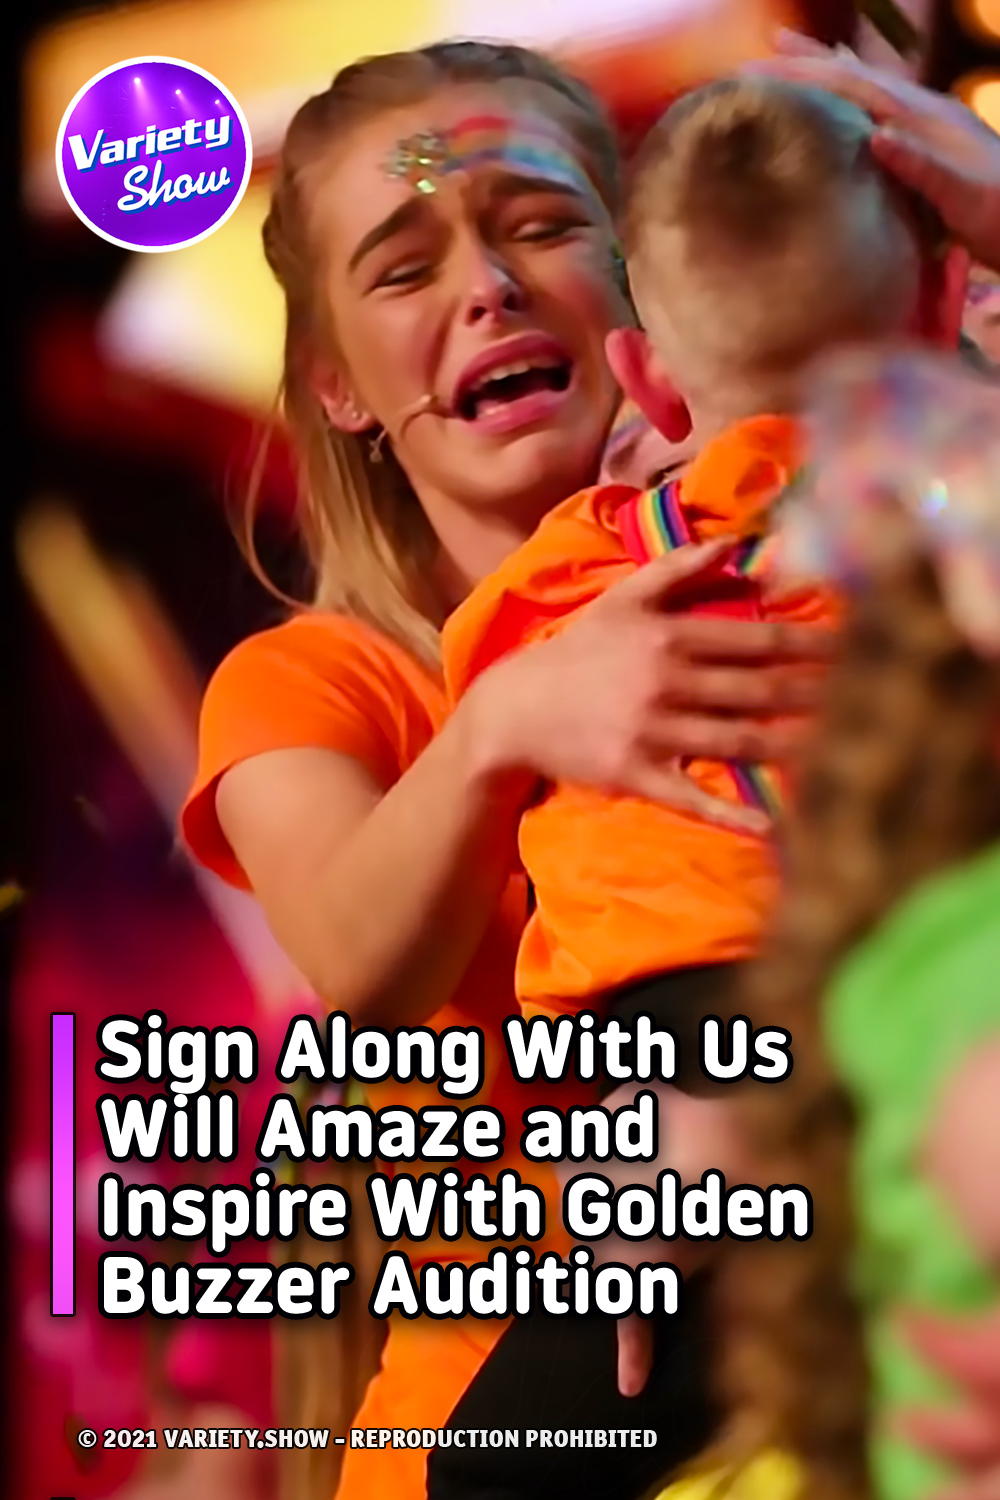 Sign Along With Us Will Amaze and Inspire With Golden Buzzer Audition